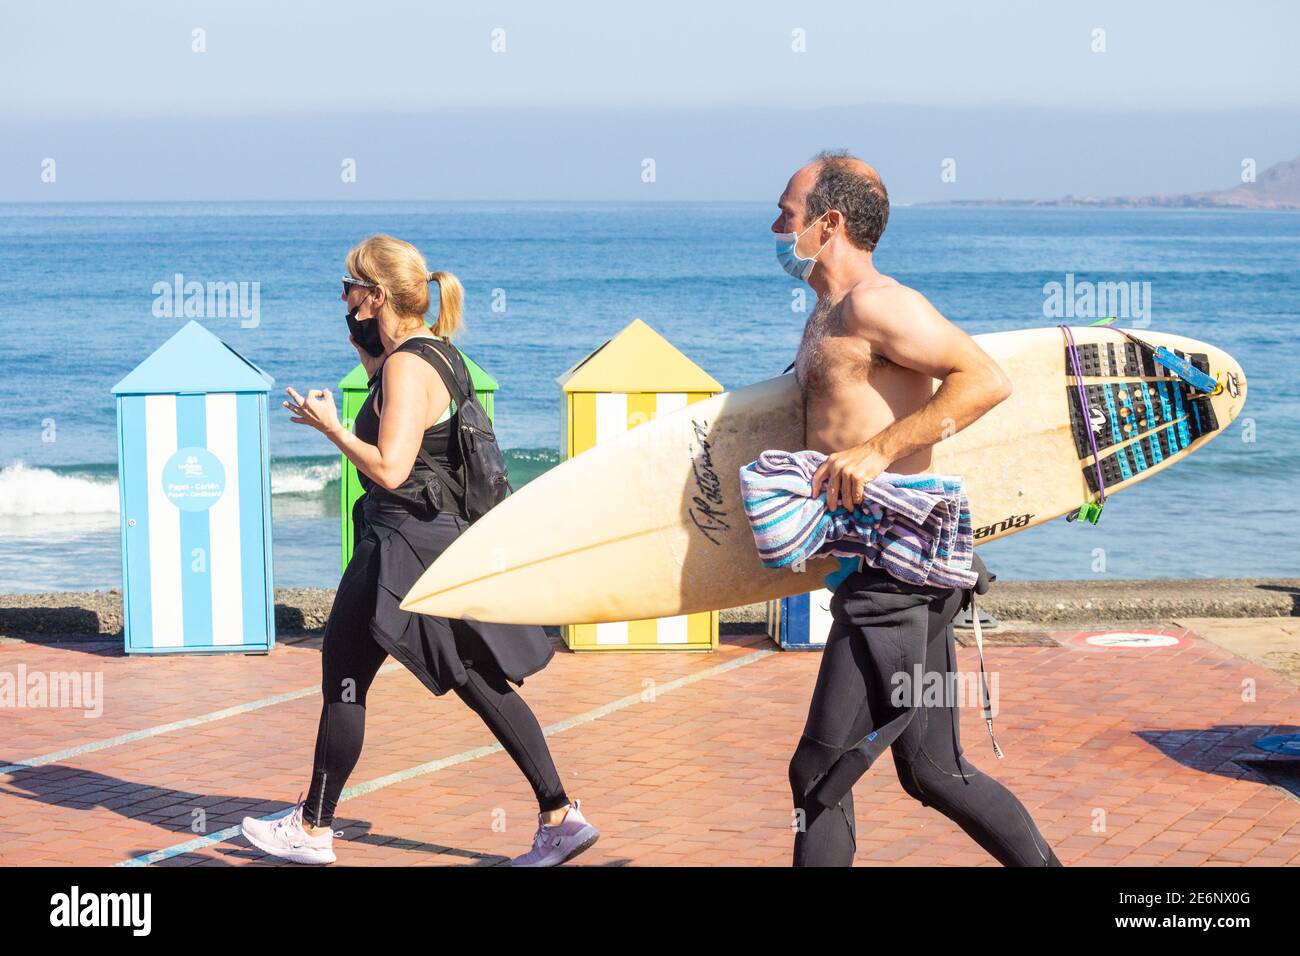 Surfer wearing face mask during Coronavirus, Covid 19 pandemic in Spain Stock Photo